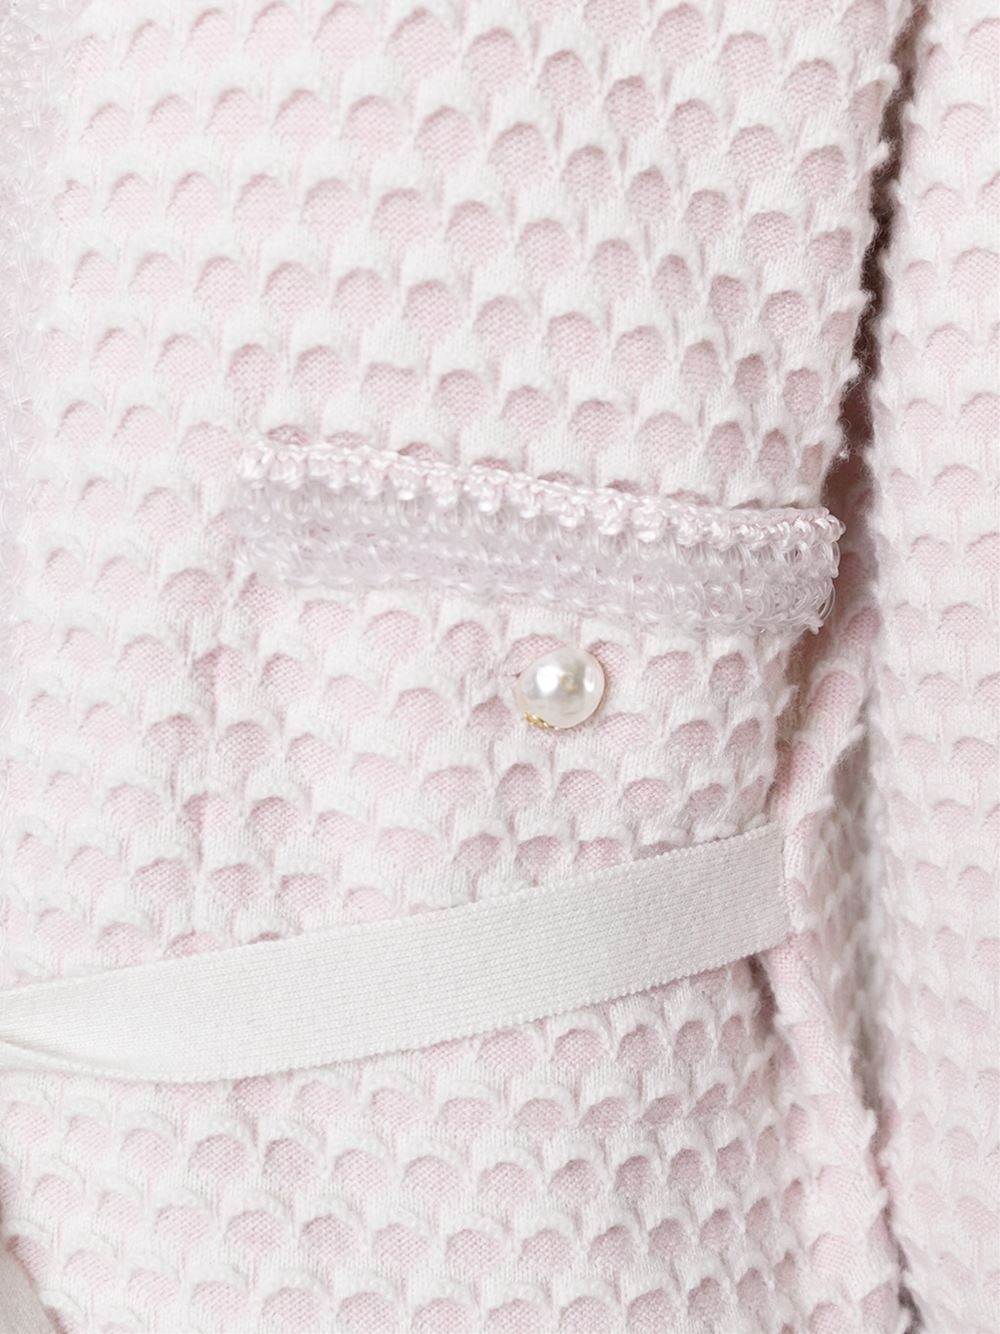 This powder pink cashmere textured top from Chanel features a round neck, a front hook and eye fastening, a tie fastening, two front pockets, three-quarter length sleeves and a curved hem.

Colour: Powder Pink

Material: Cahsmere (100%)

Size: